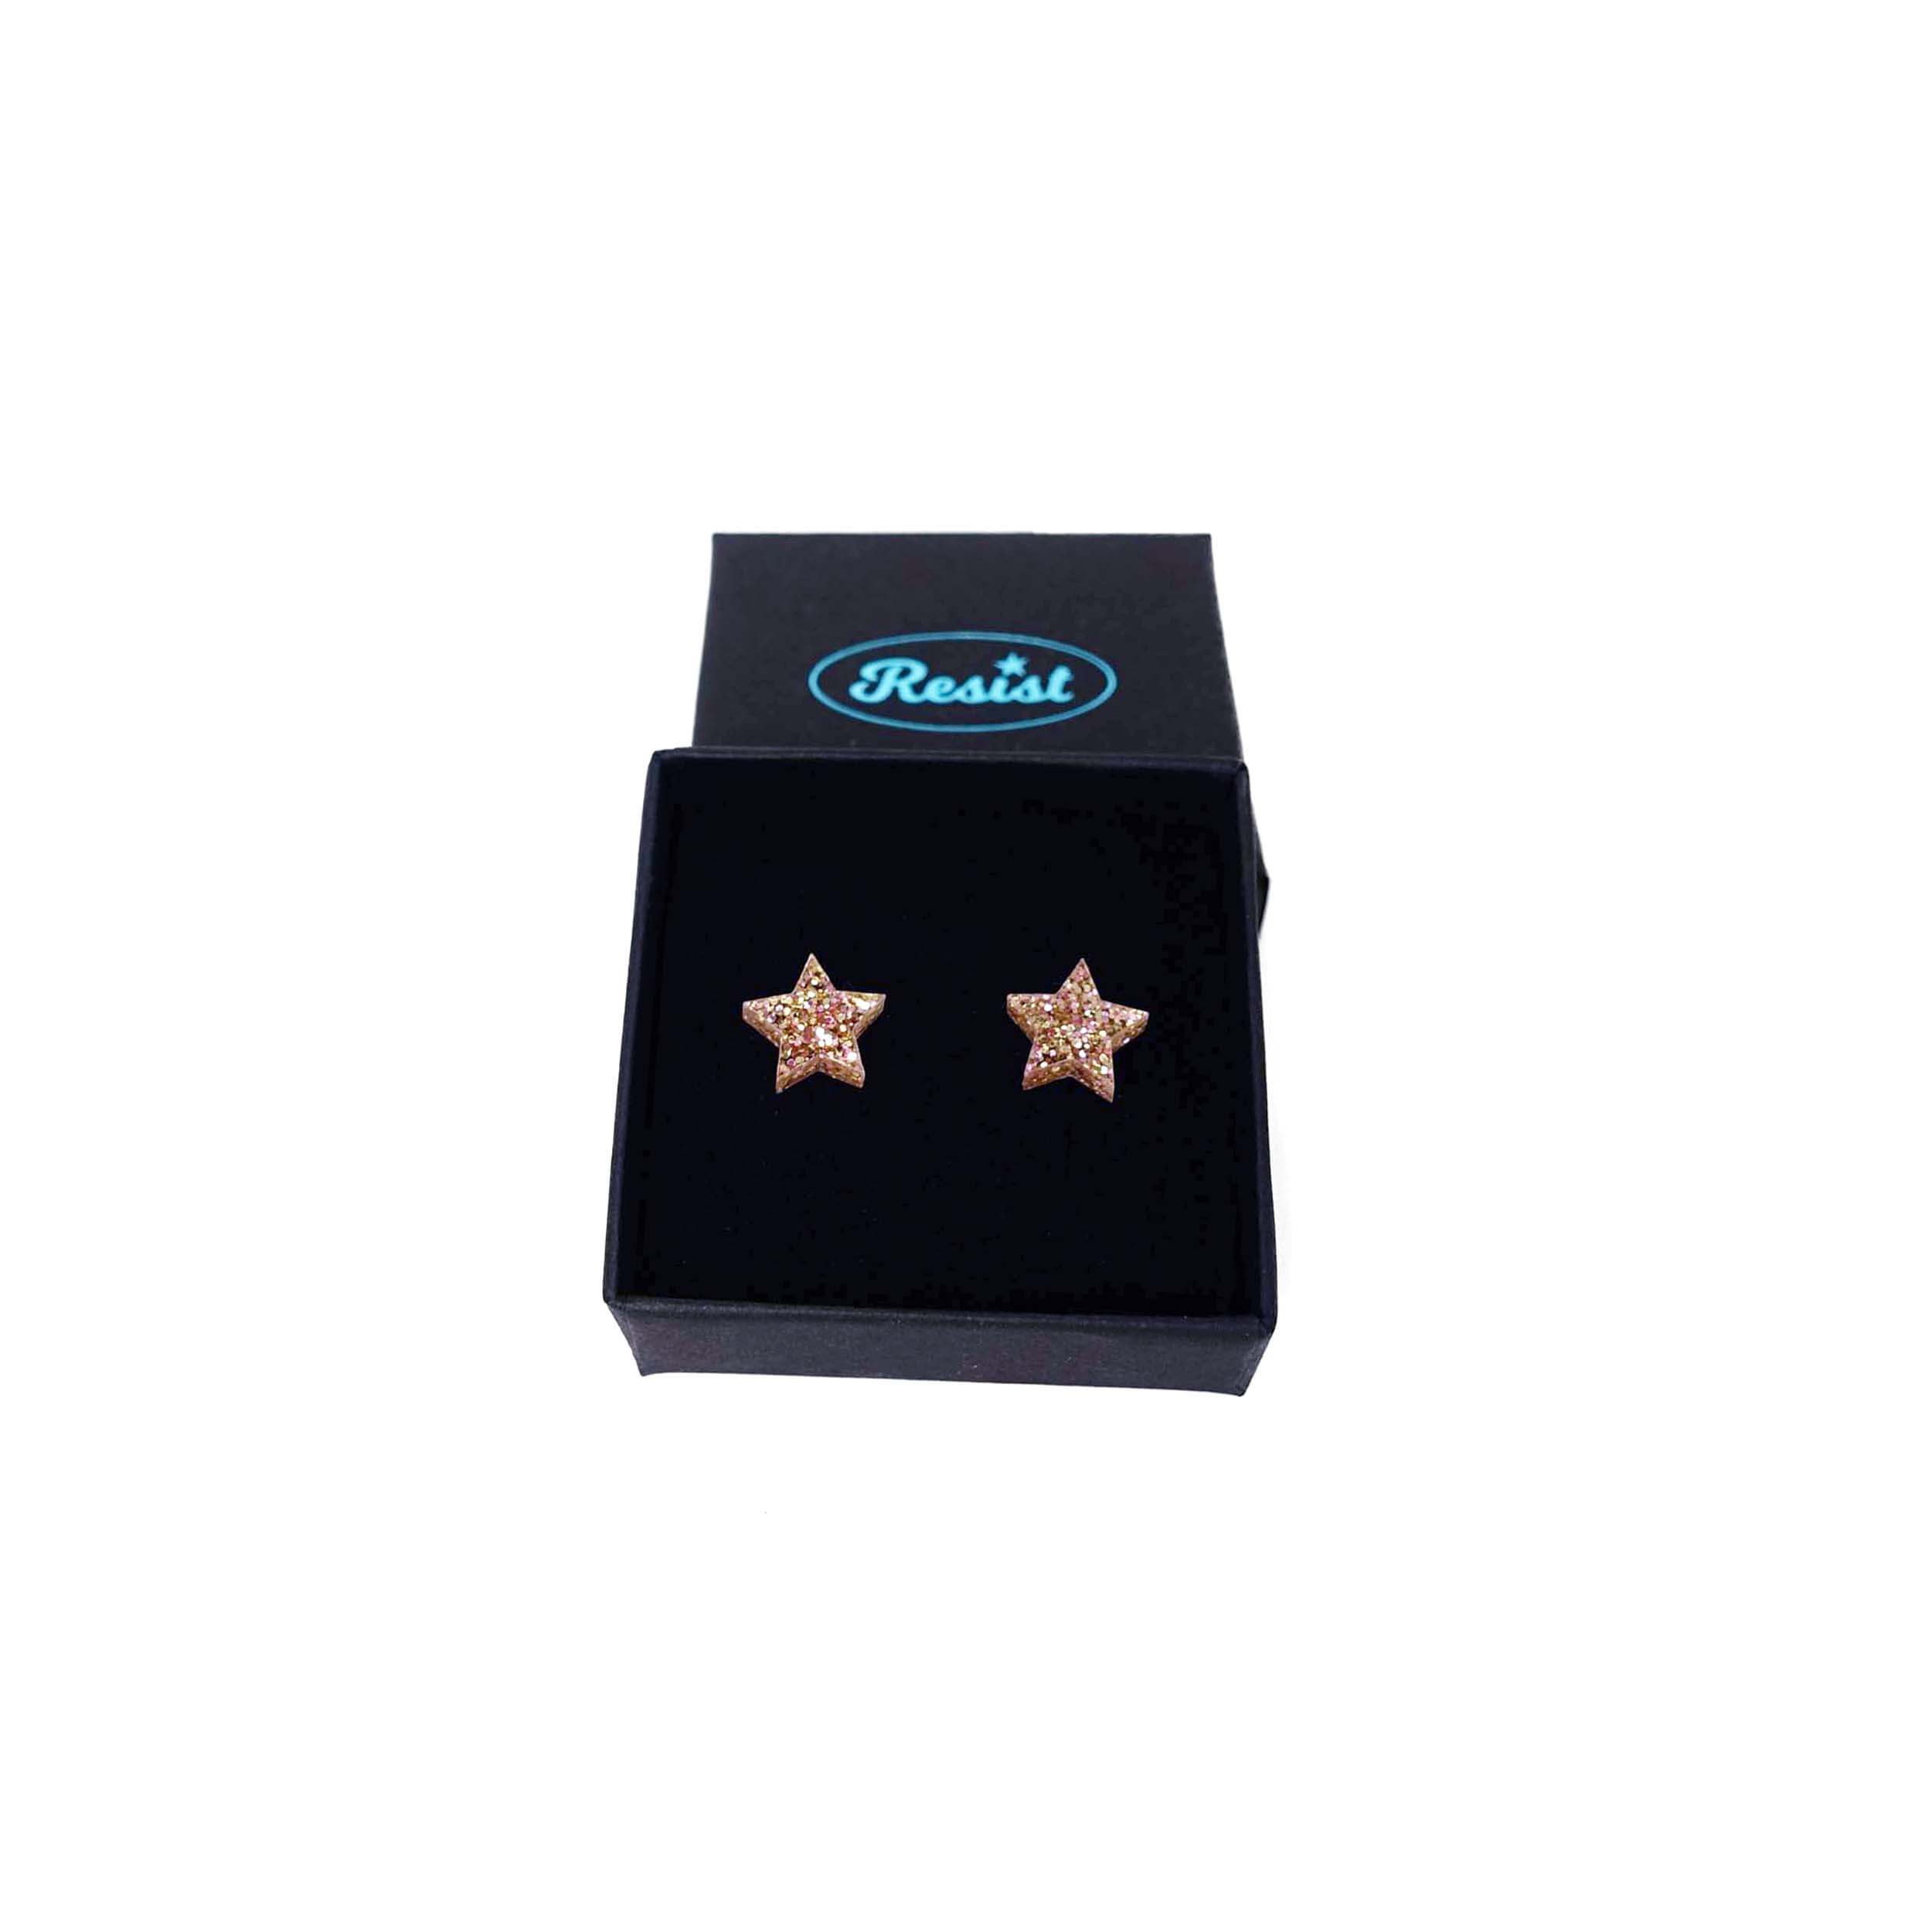 Small star earrings in pink fizz glitter shown in a Wear and Resist gift box. 